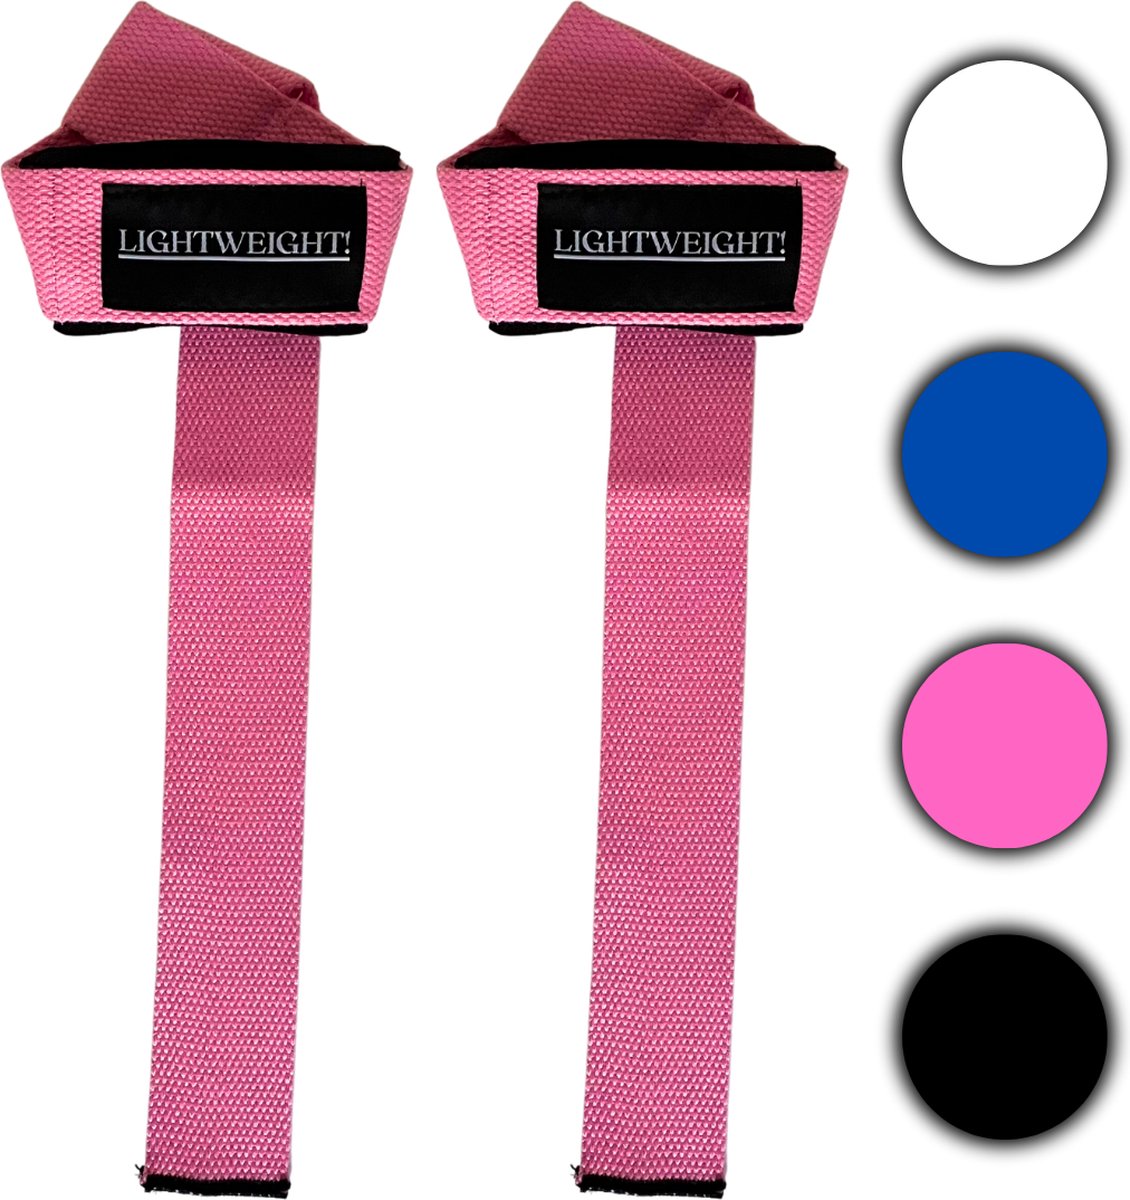 LIGHTWEIGHT! Lifting Straps - Wrist Straps - Deadlift Straps - Roze - Krachttraining Accessoires - Lifting Grips - Powerlifting - Bodybuilding - Gym Straps - Fitness - Set - Incl Padding